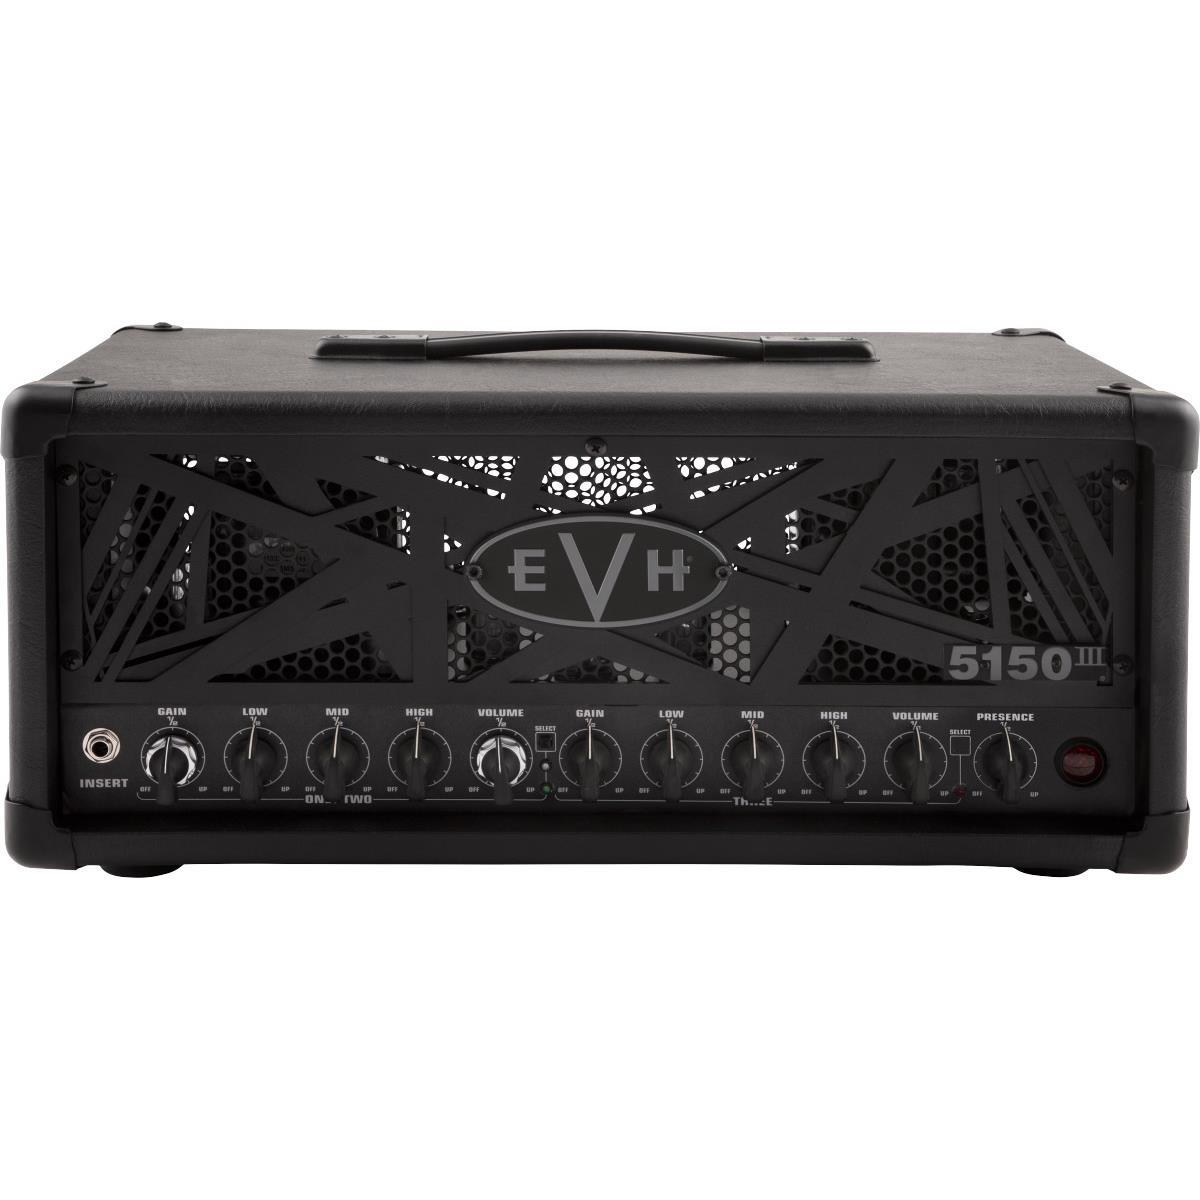 EVH 5150III 50S 6L6 50W 3-Channel Amplifier Head, 120V, Black With its smaller size and portability, the all-new EVH 5150III 50S 6L6 Head is the perfect amp for players who want Ed Van Halen's touring tone, arena volume and performance in a compact package. Three channels of road-tested sound work for any playing style-crisp cleans, chunky overdrive, tight distortion and searing leads, while newly added independent dual-concentric controls allow for gain and volume level matching.Tweaked to meet Eddie's touring requirements, this 50-watt head delivers a full-spectrum of tone. Channel one powers crystal-clear clean tone; channel two features increased gain for greater sustain and is re-voiced for improved low-mid frequency definition; channel three also has improved range for the "low" control and oozes with increased liquid gain.Channels one and two each have dual concentric gain/volume controls, with shared EQ (low, mid, high). Channel three has its own gain, volume and EQ (low, mid, high) controls. All three channels also have global presence and global resonance controls.The amp is also loaded with seven JJ ECC83 preamp tubes, a pair of Shuguang 6L6 power tubes, switchable output impedance (4, 8 and 16 ohms) and an adjustable bias control.Seductively dark in black textured vinyl with a dual black EVH striped steel grille front panel, our 50-watt stealth head also comes with vintage-style "chicken head" black control knobs, red lamp jewel, dual speaker output jacks, four-button footswitch, effects loop, direct out and molded plastic handle.